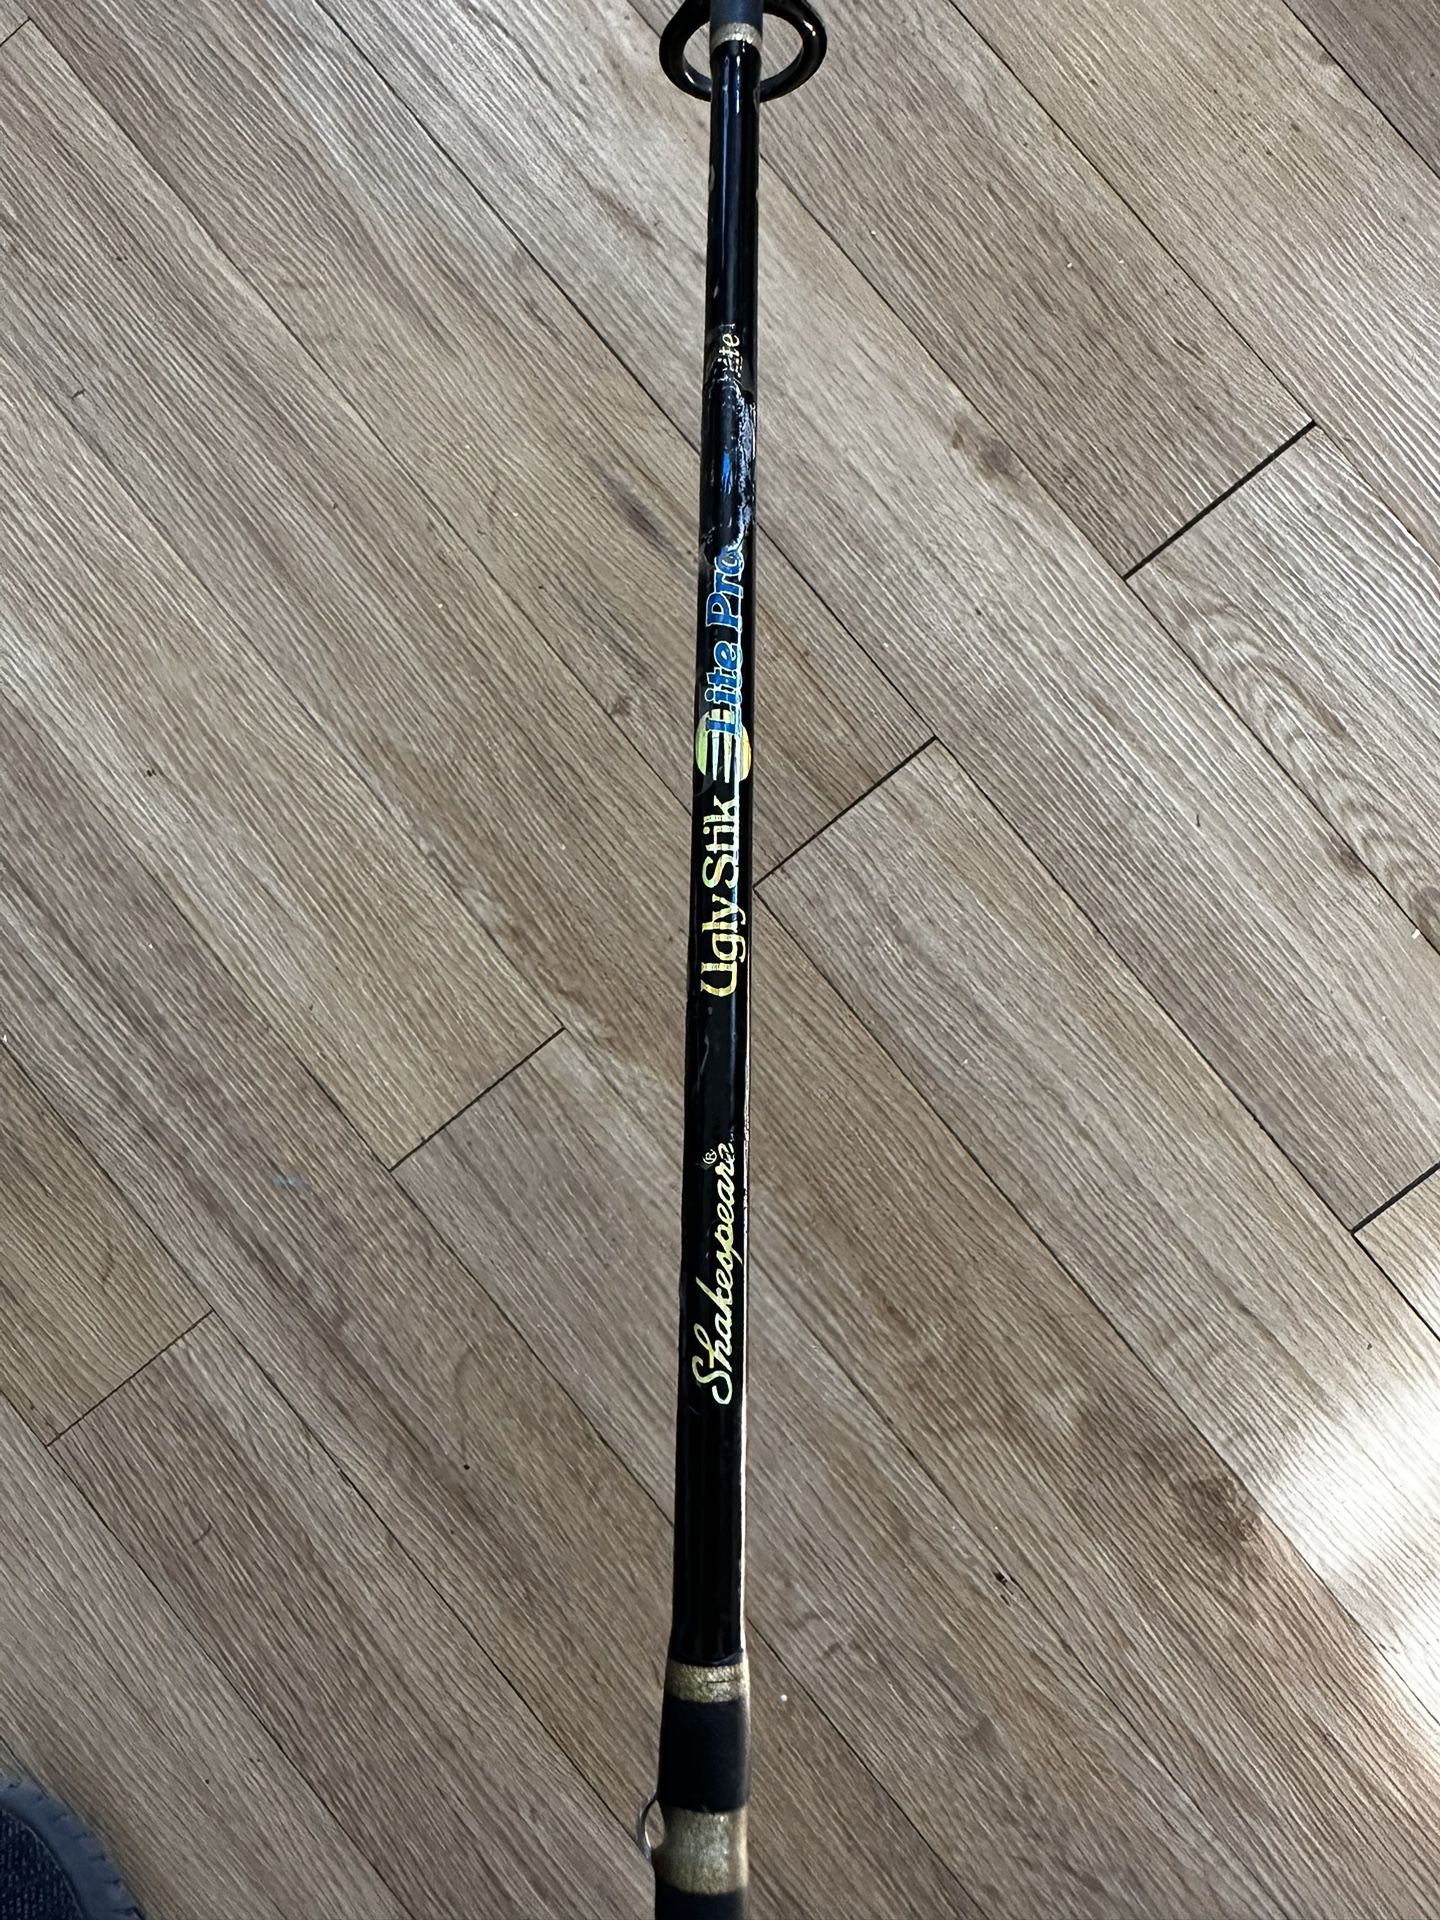 6 Foot Ugly Stick 